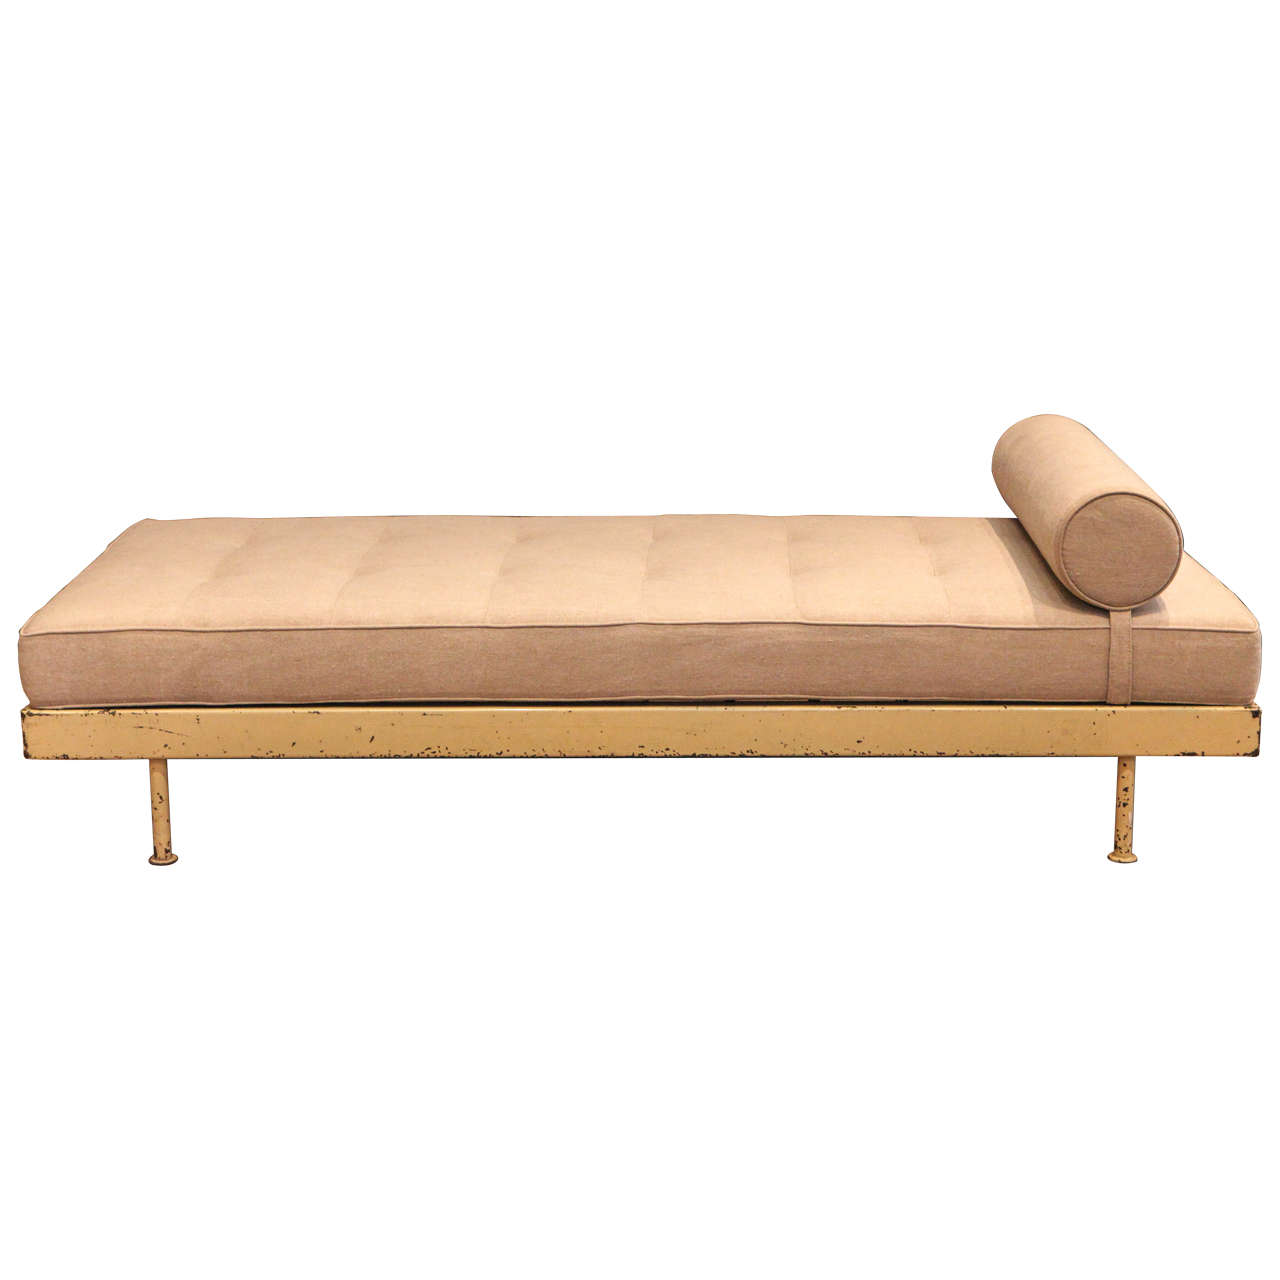 Jean Prouvé Scal Daybed by Jean Prouvé Ateliers, 1951